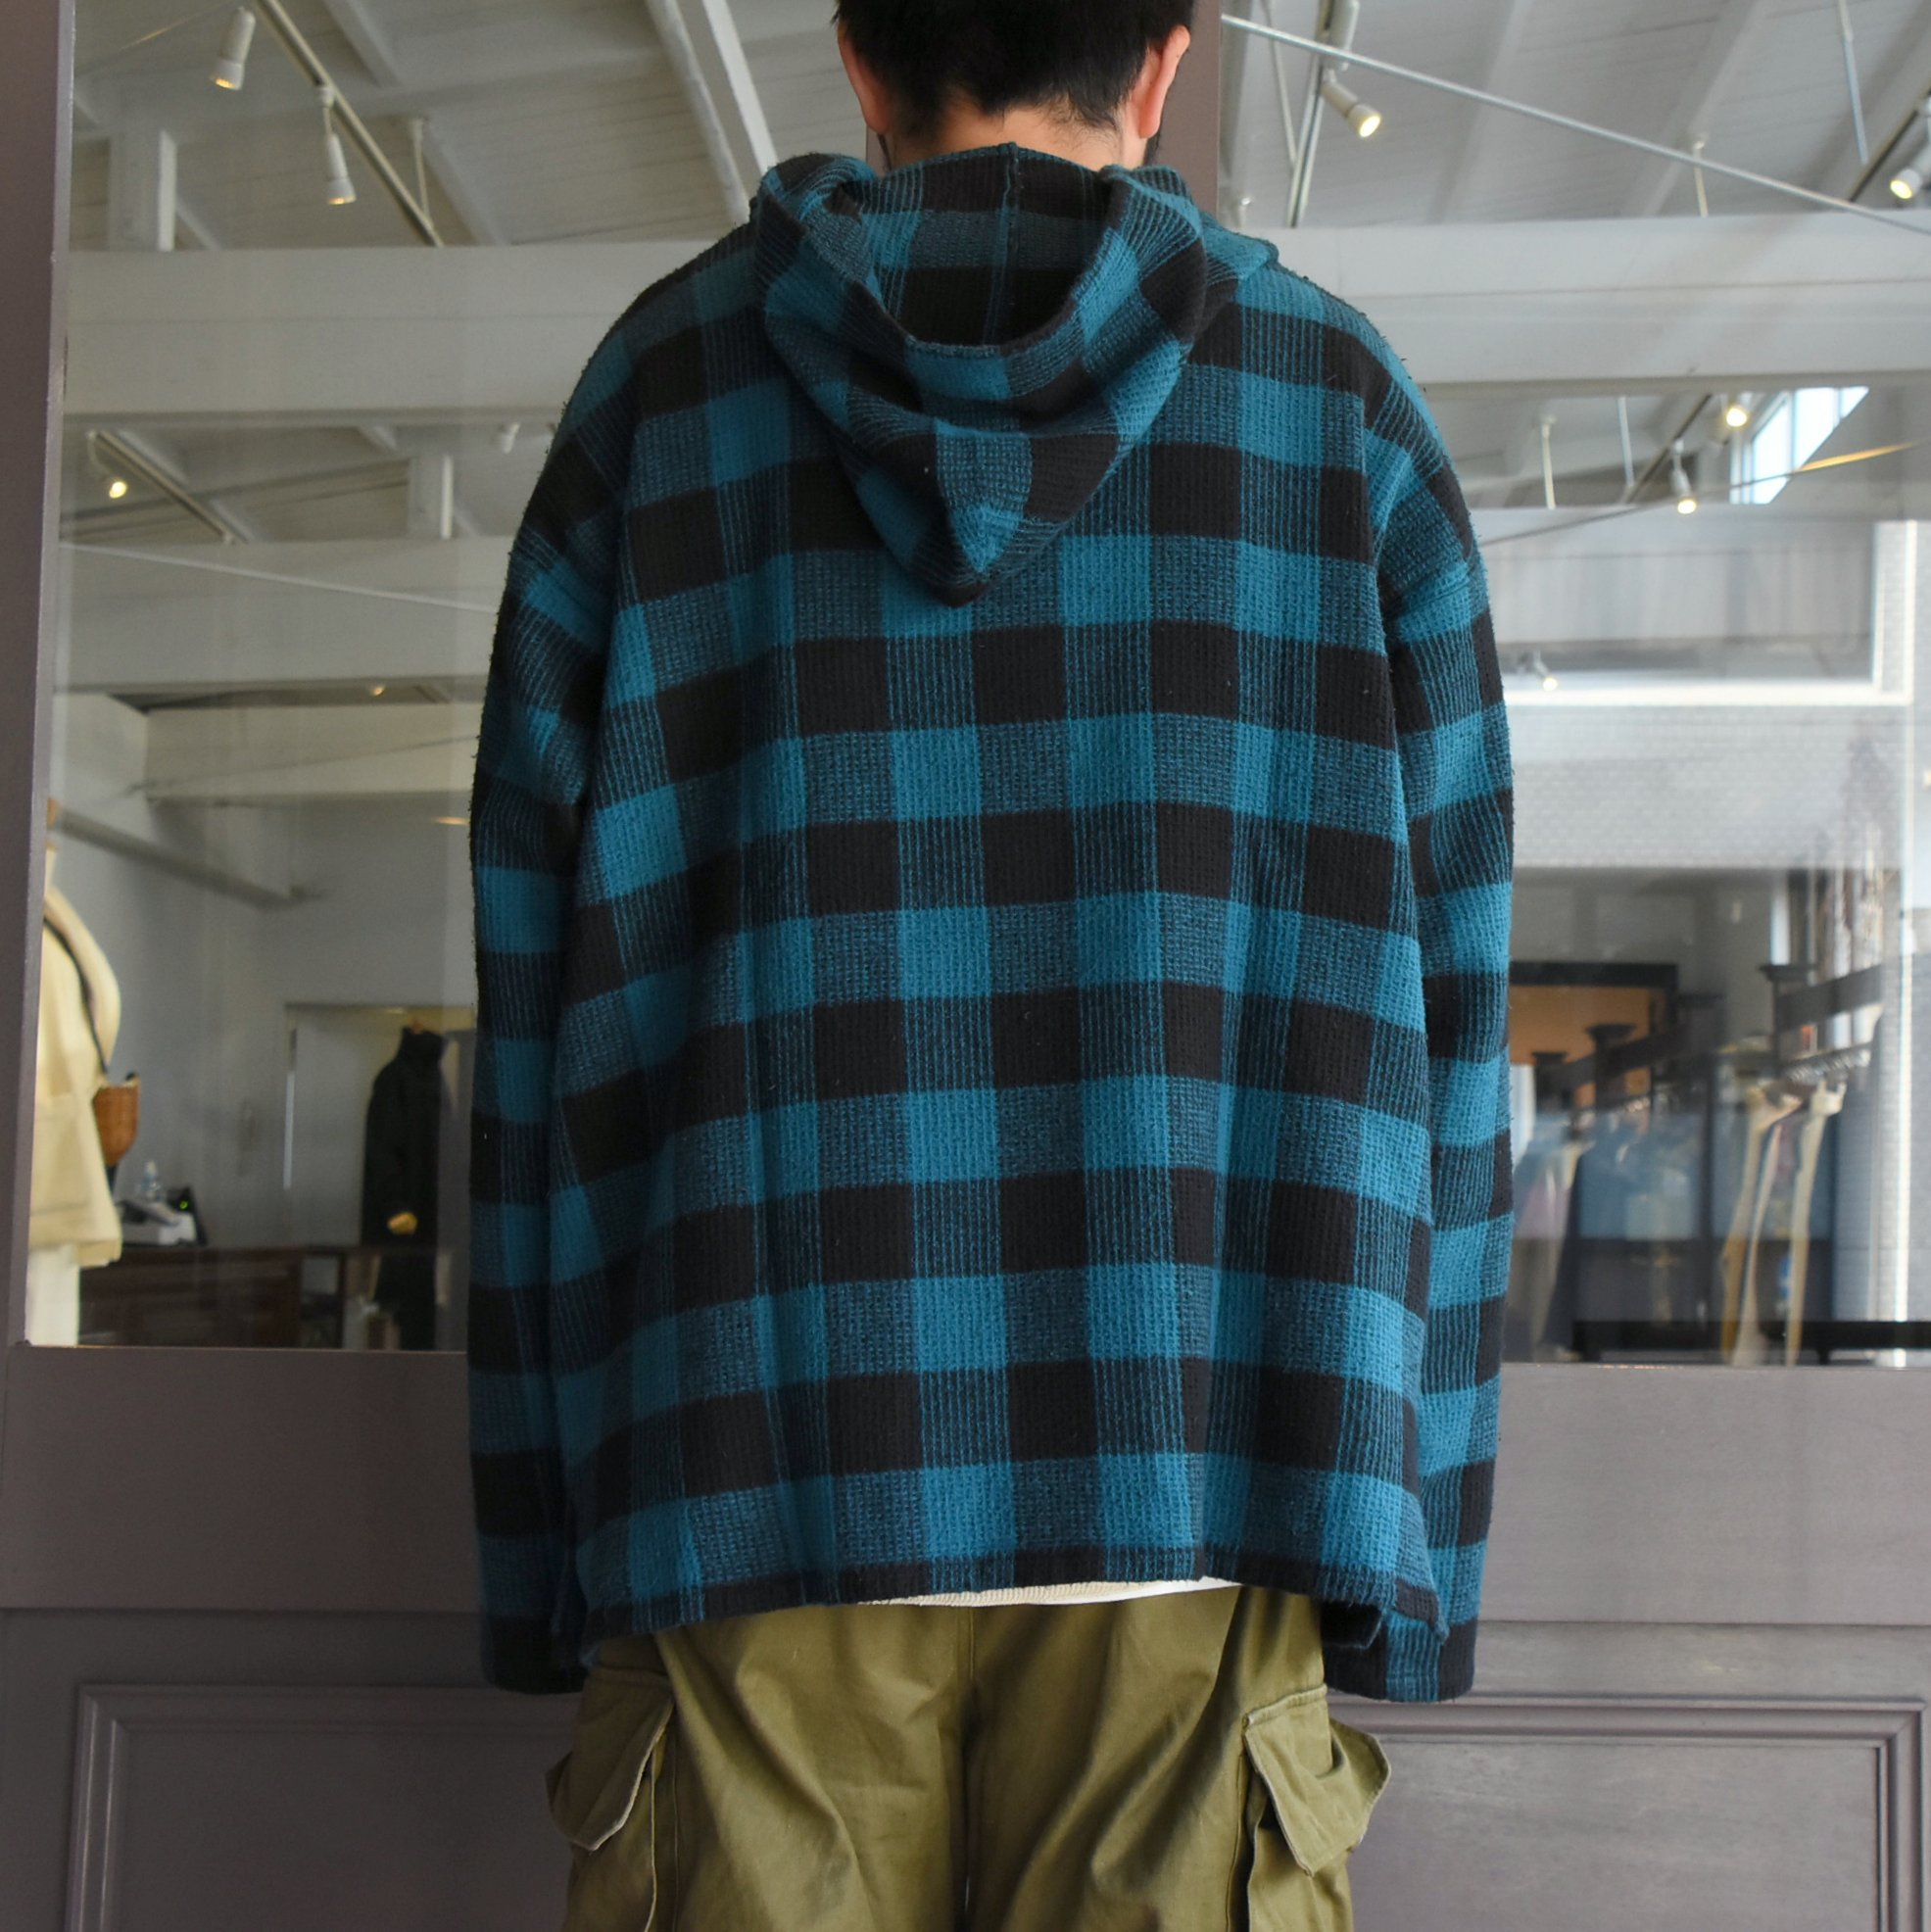 40% off sale】South2 West8(サウスツーウエストエイト) Mexican Parka ...